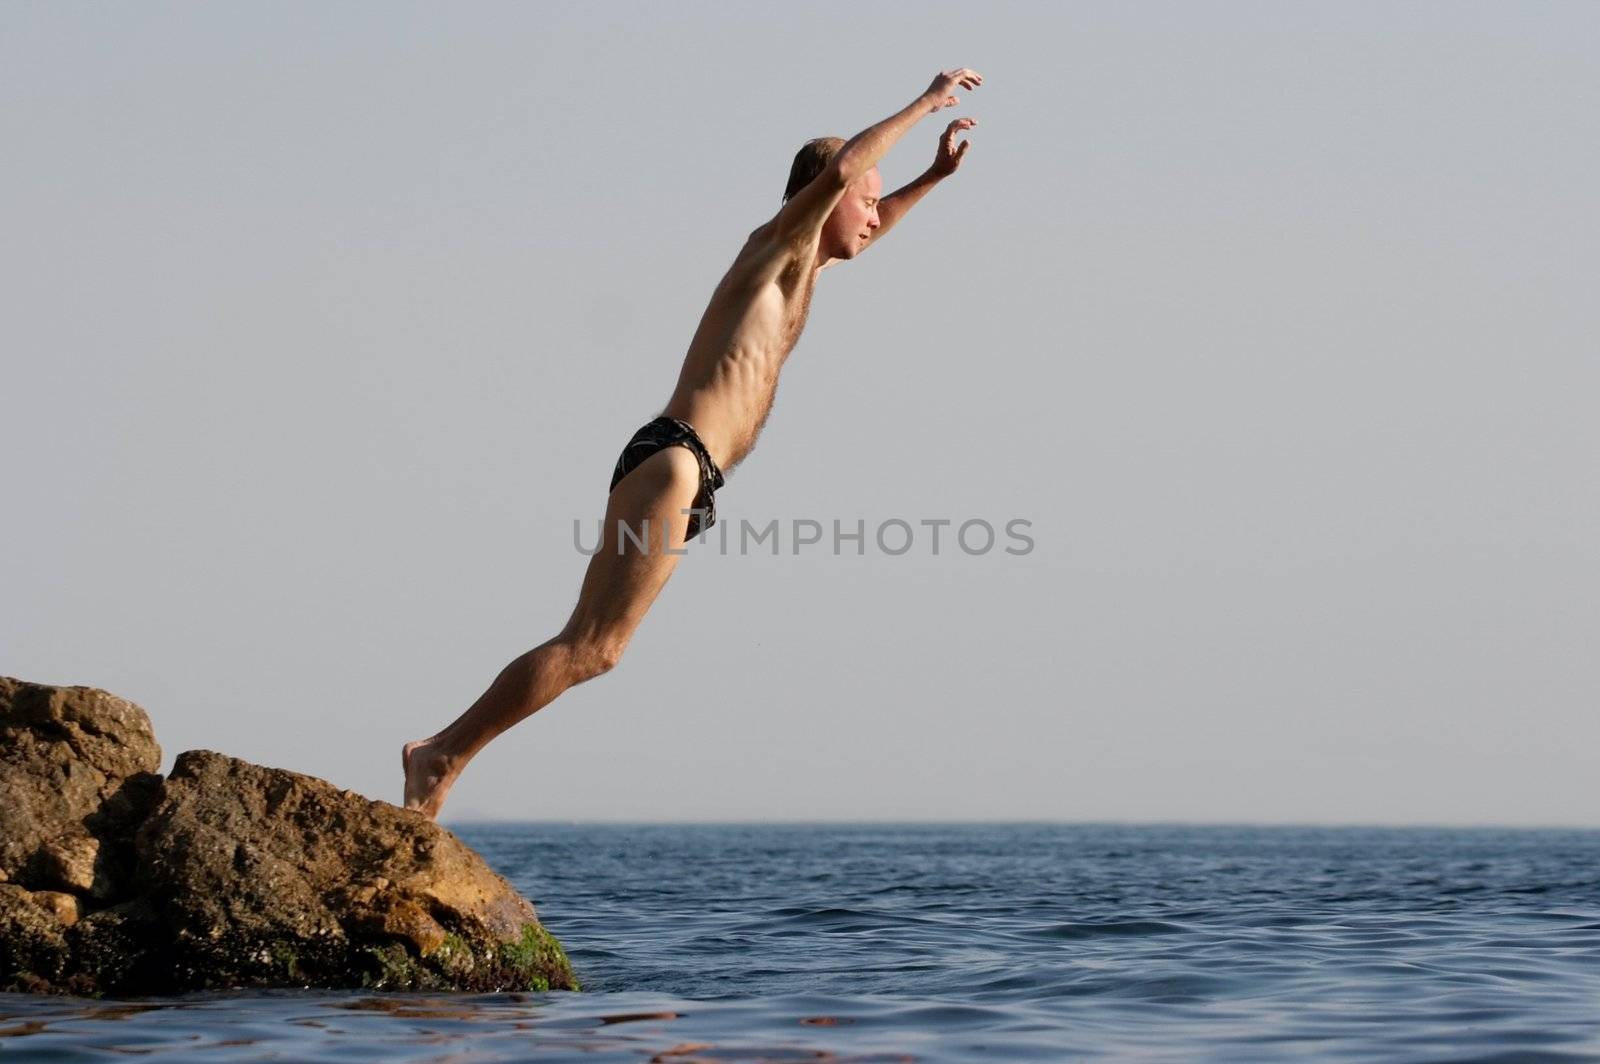 Man jumping in the water of the sea